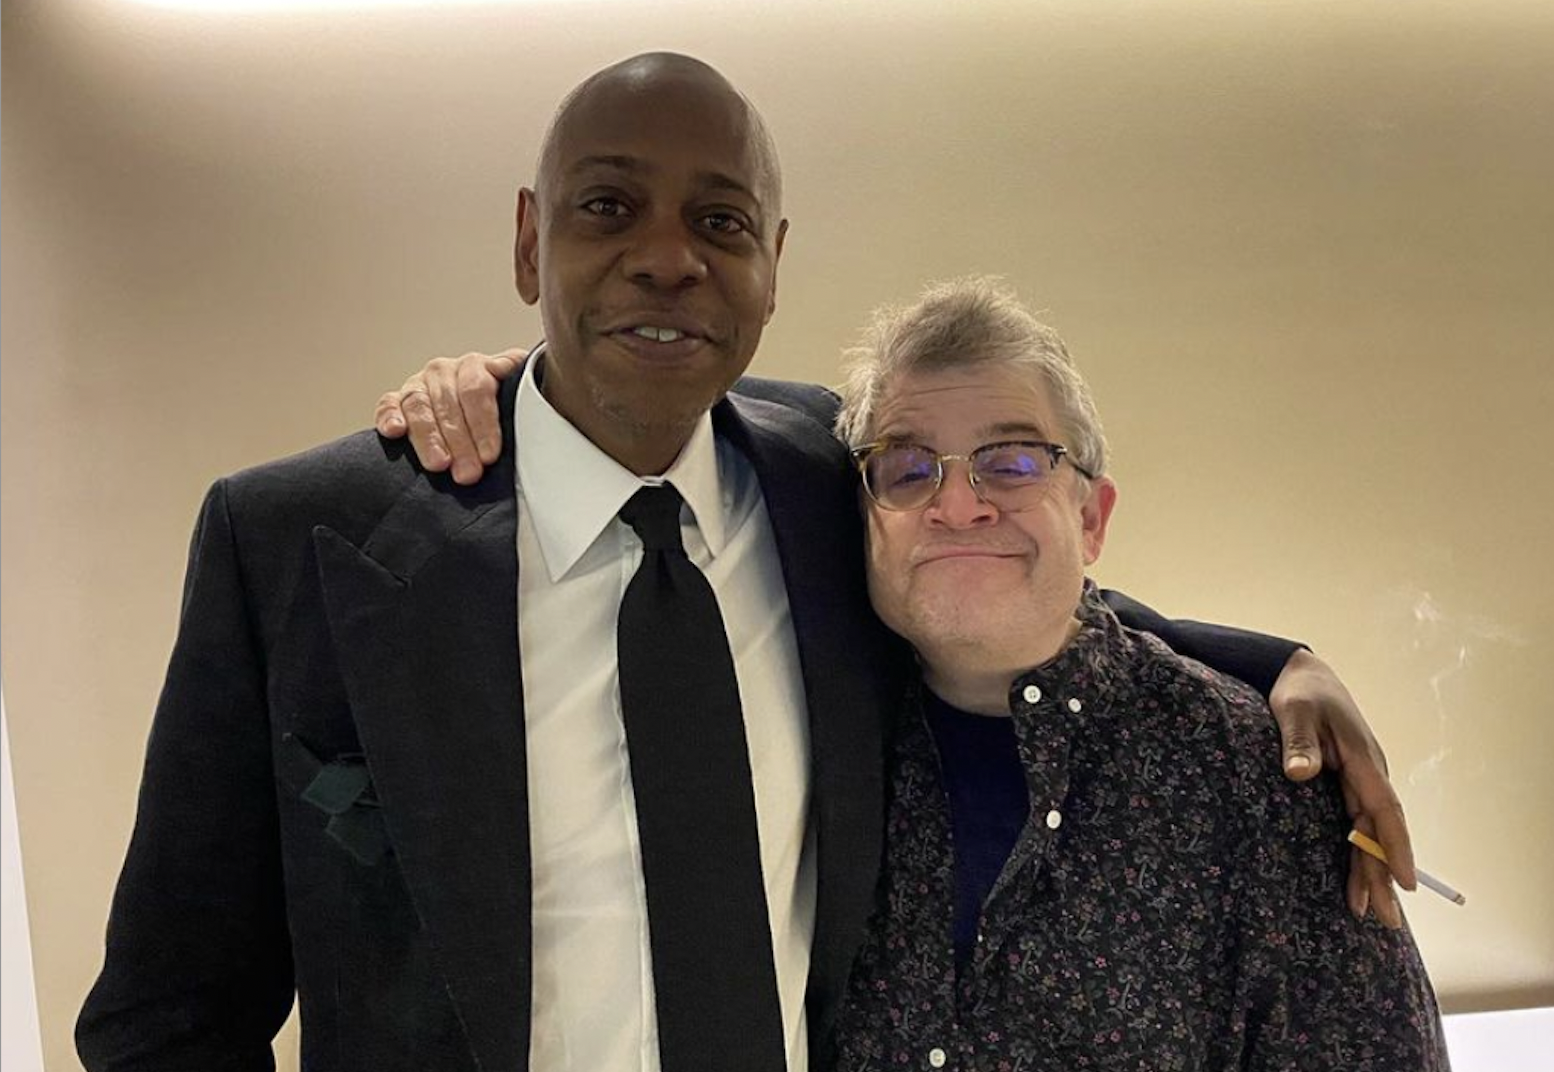 Patton Oswalt Reflects on His Friendship with Dave Chappelle